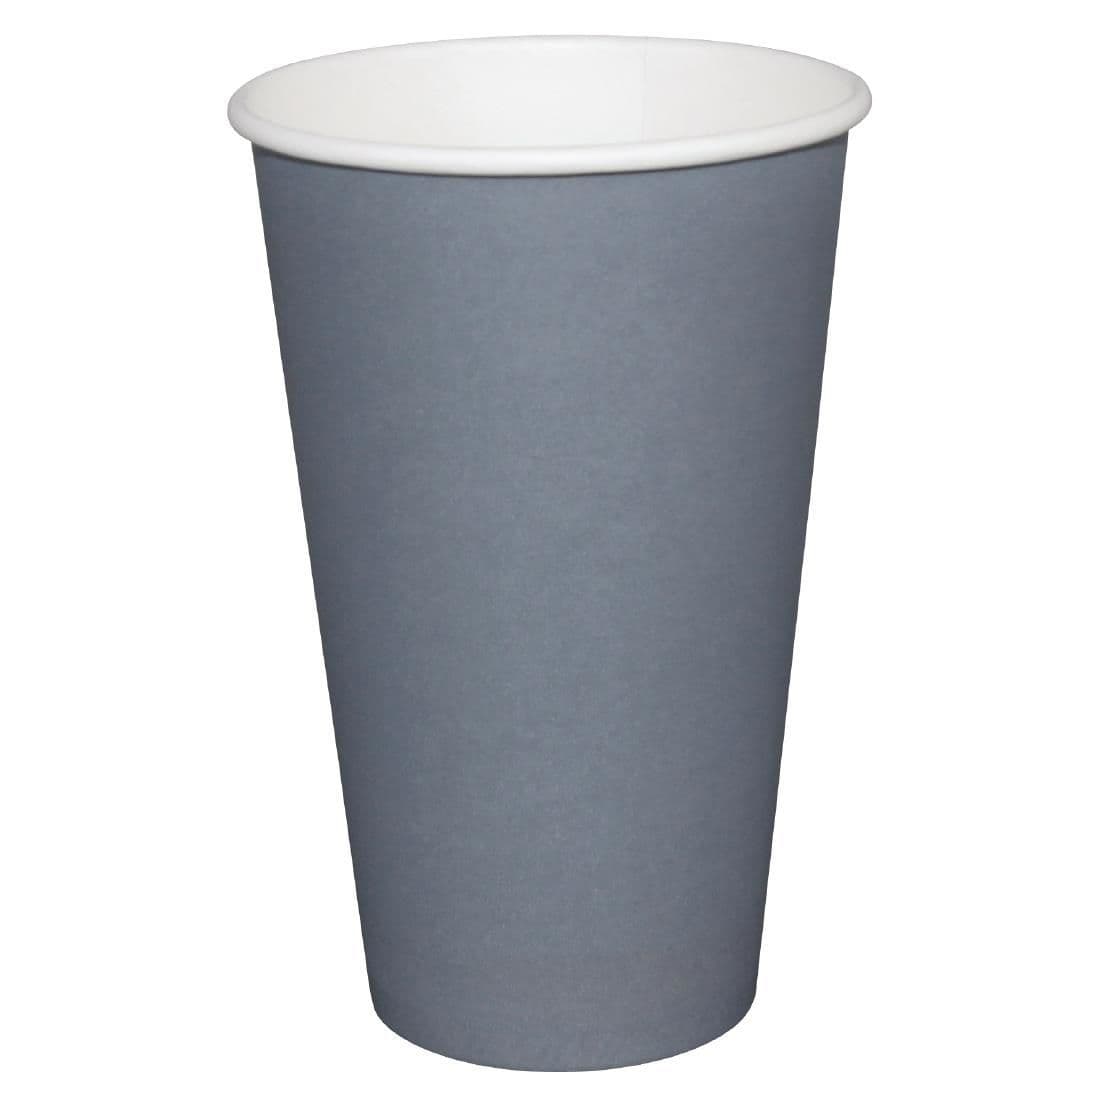 Fiesta Single Wall Takeaway Coffee Cups Charcoal 225ml / 8oz (Pack of 1000) JD Catering Equipment Solutions Ltd